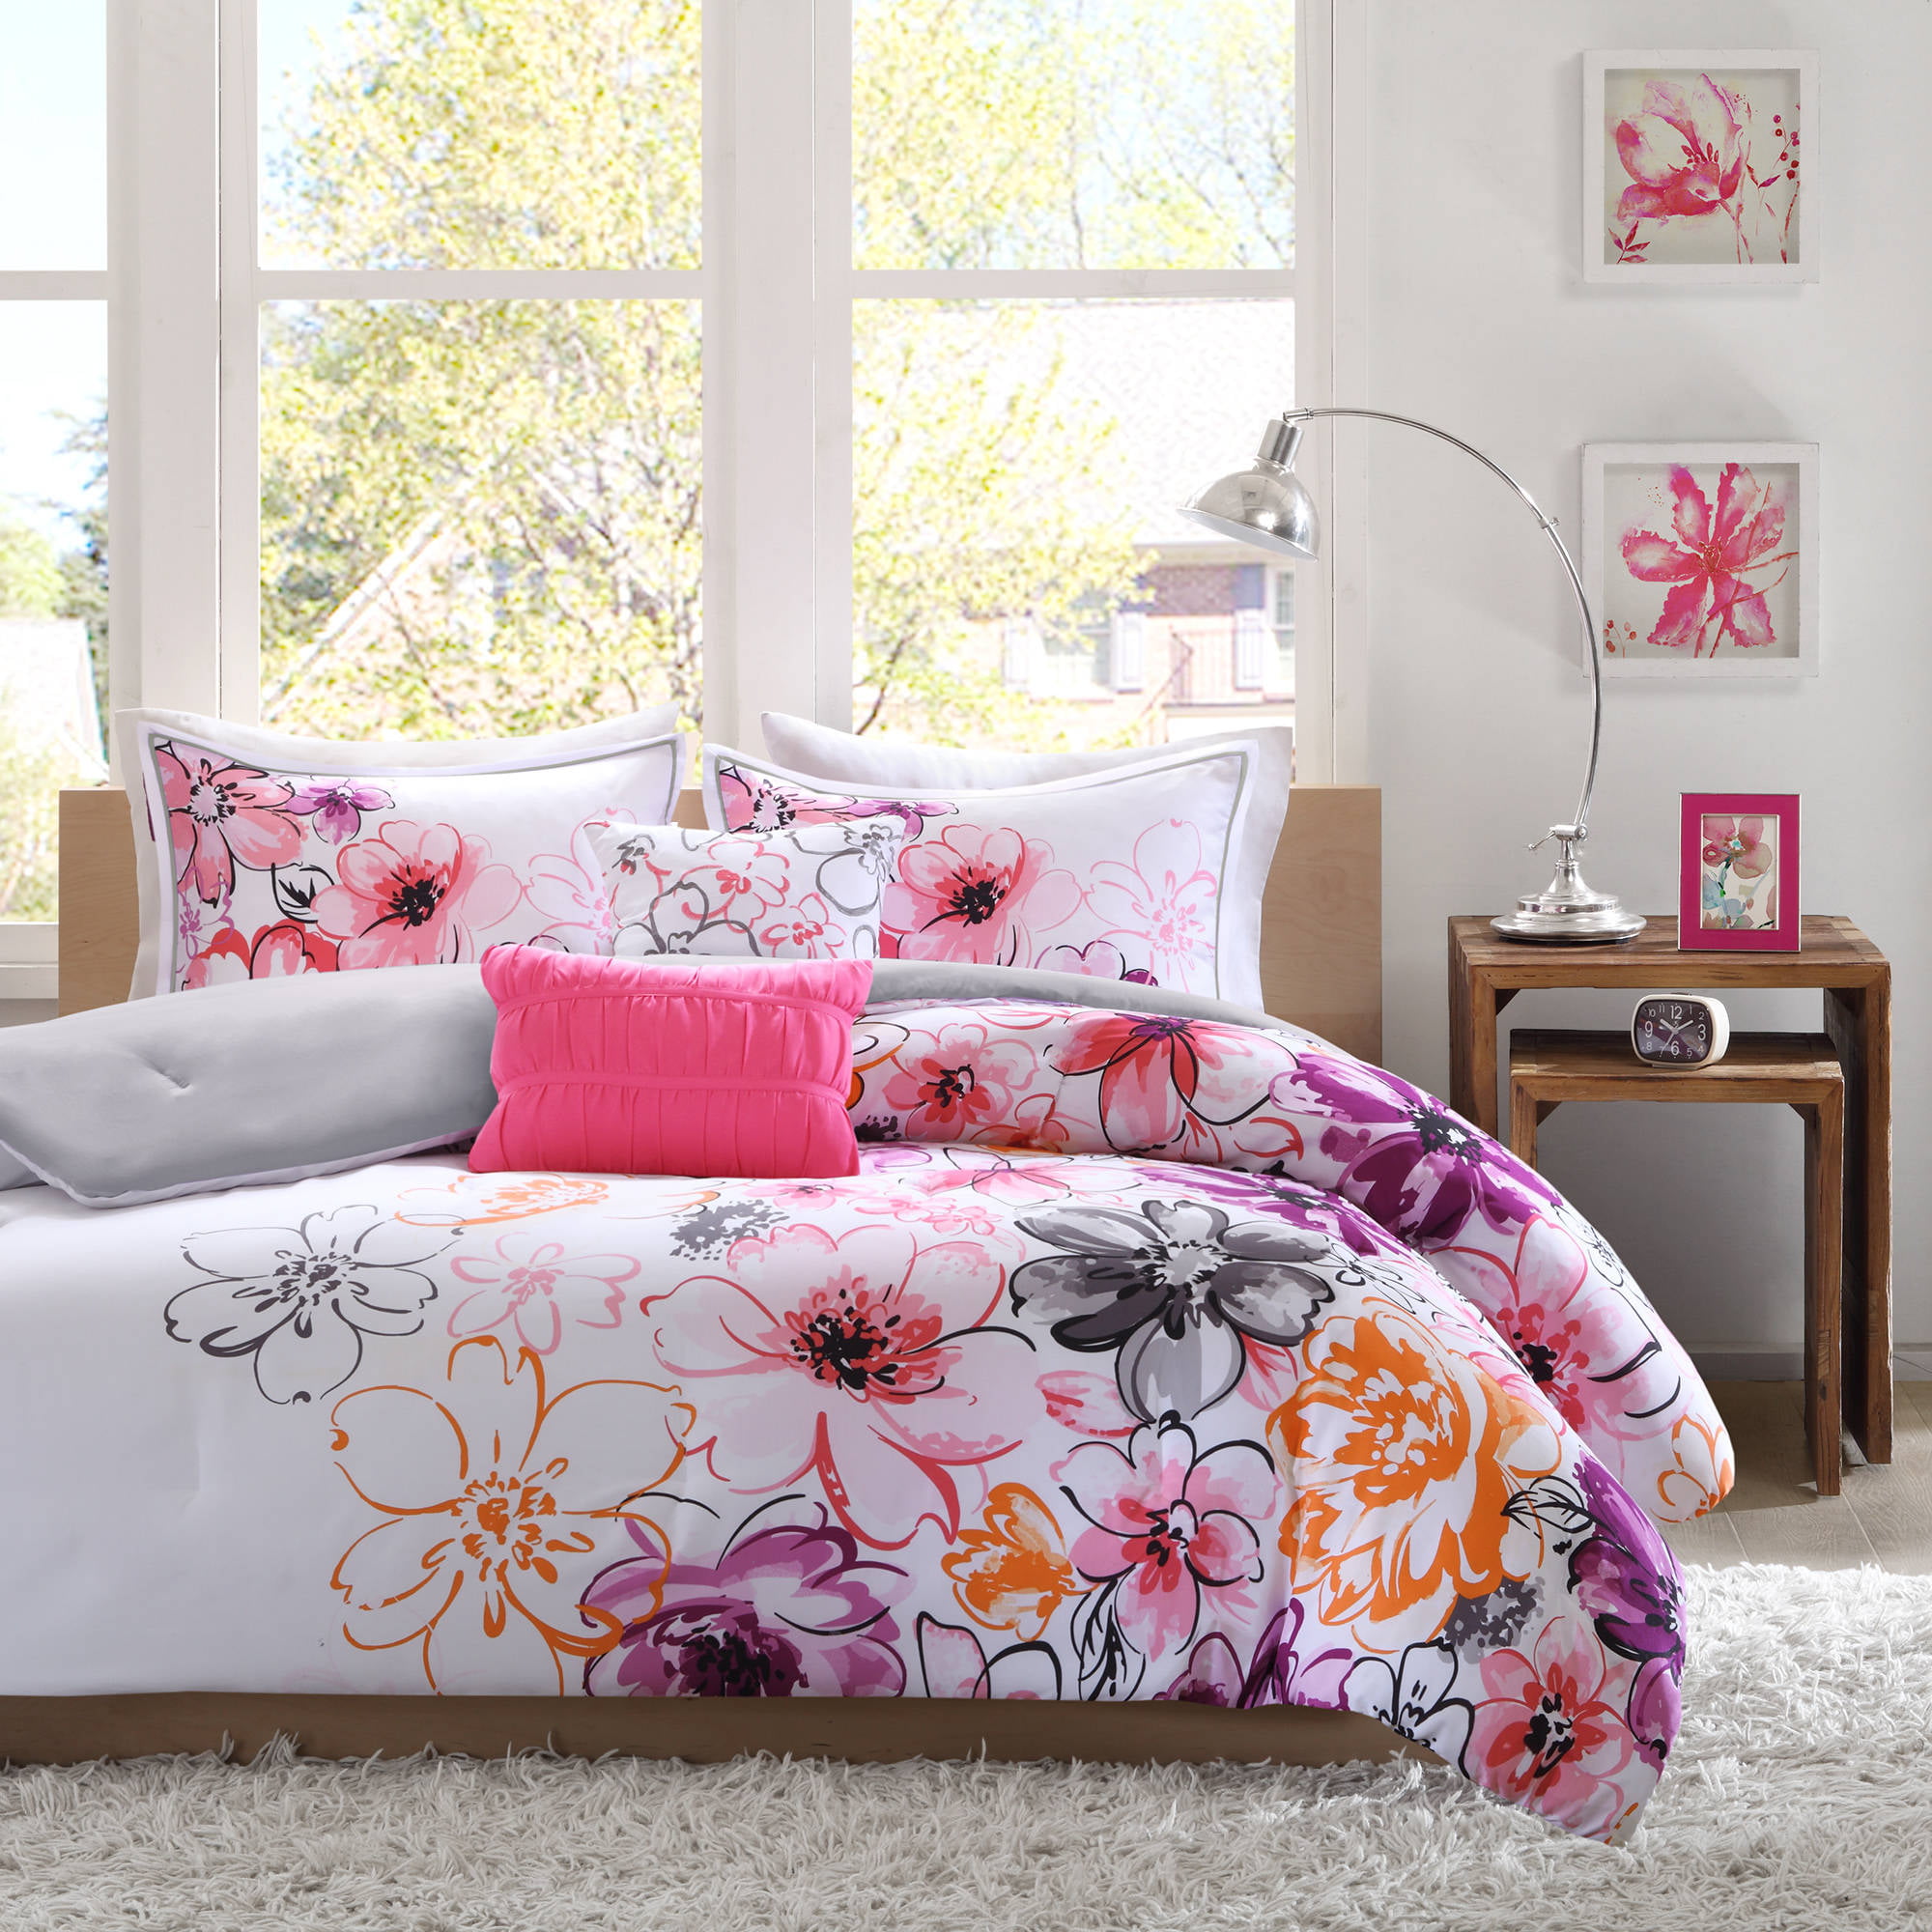 8-PC Complete Bed Set Comforter Pink Purple Floral Flowers King Queen Full Twin